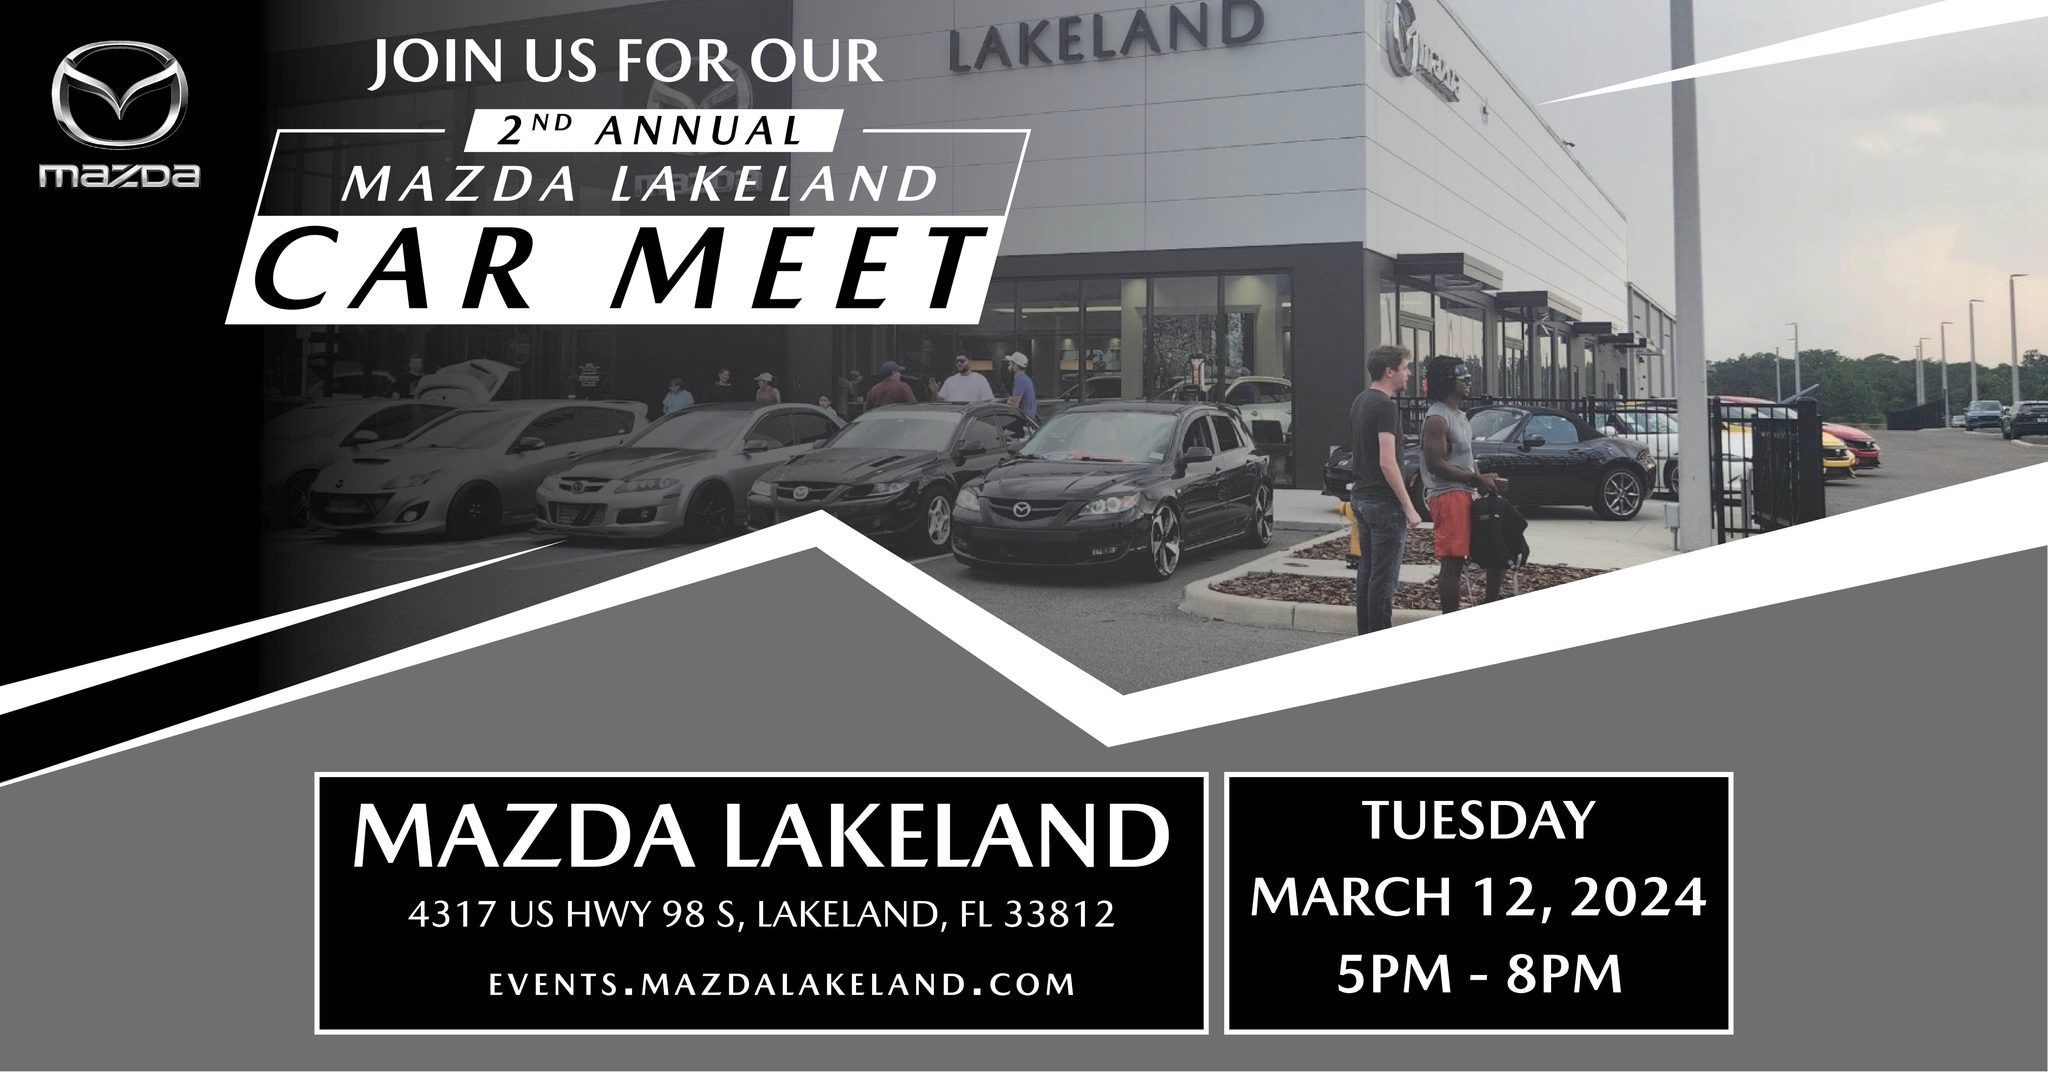 Join us for our second annual Mazda Lakeland car meet. Located at 4317 US Highway 98 South, Lakeland FL 33812. Tuesday March 12th, 2024. 5PM to 8PM.